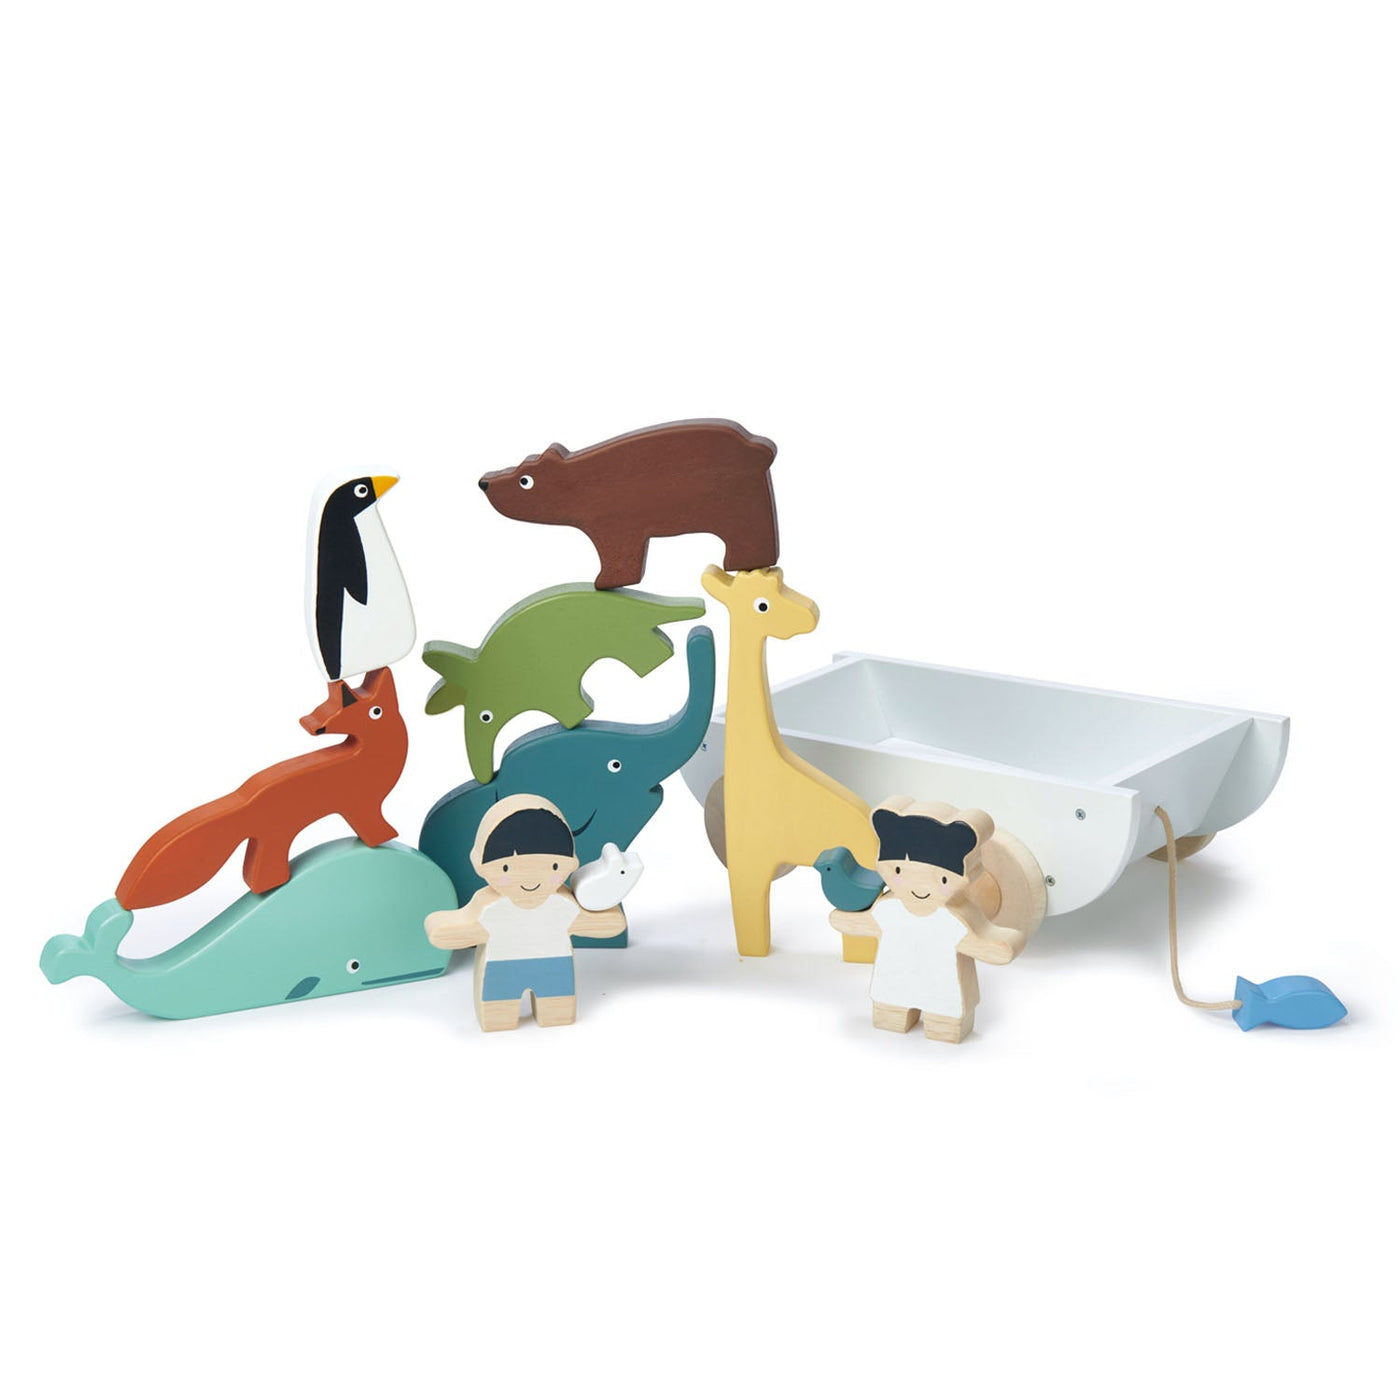 The Friend Ship Pull-Along Toy